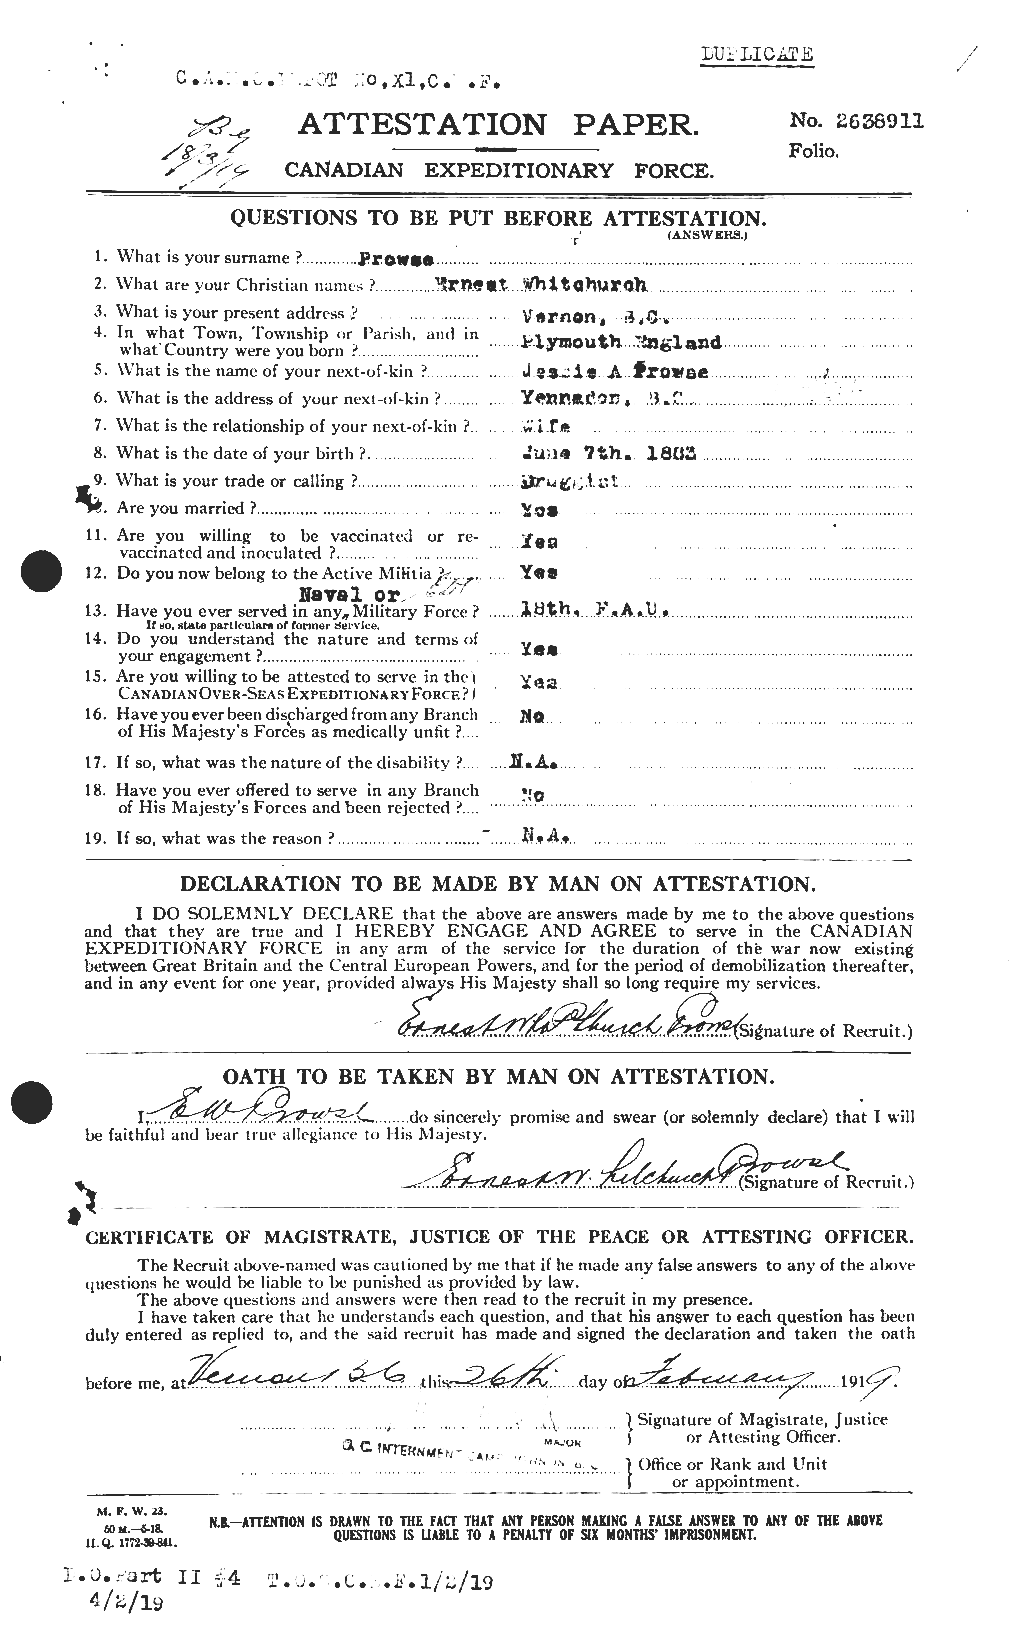 Personnel Records of the First World War - CEF 588731a